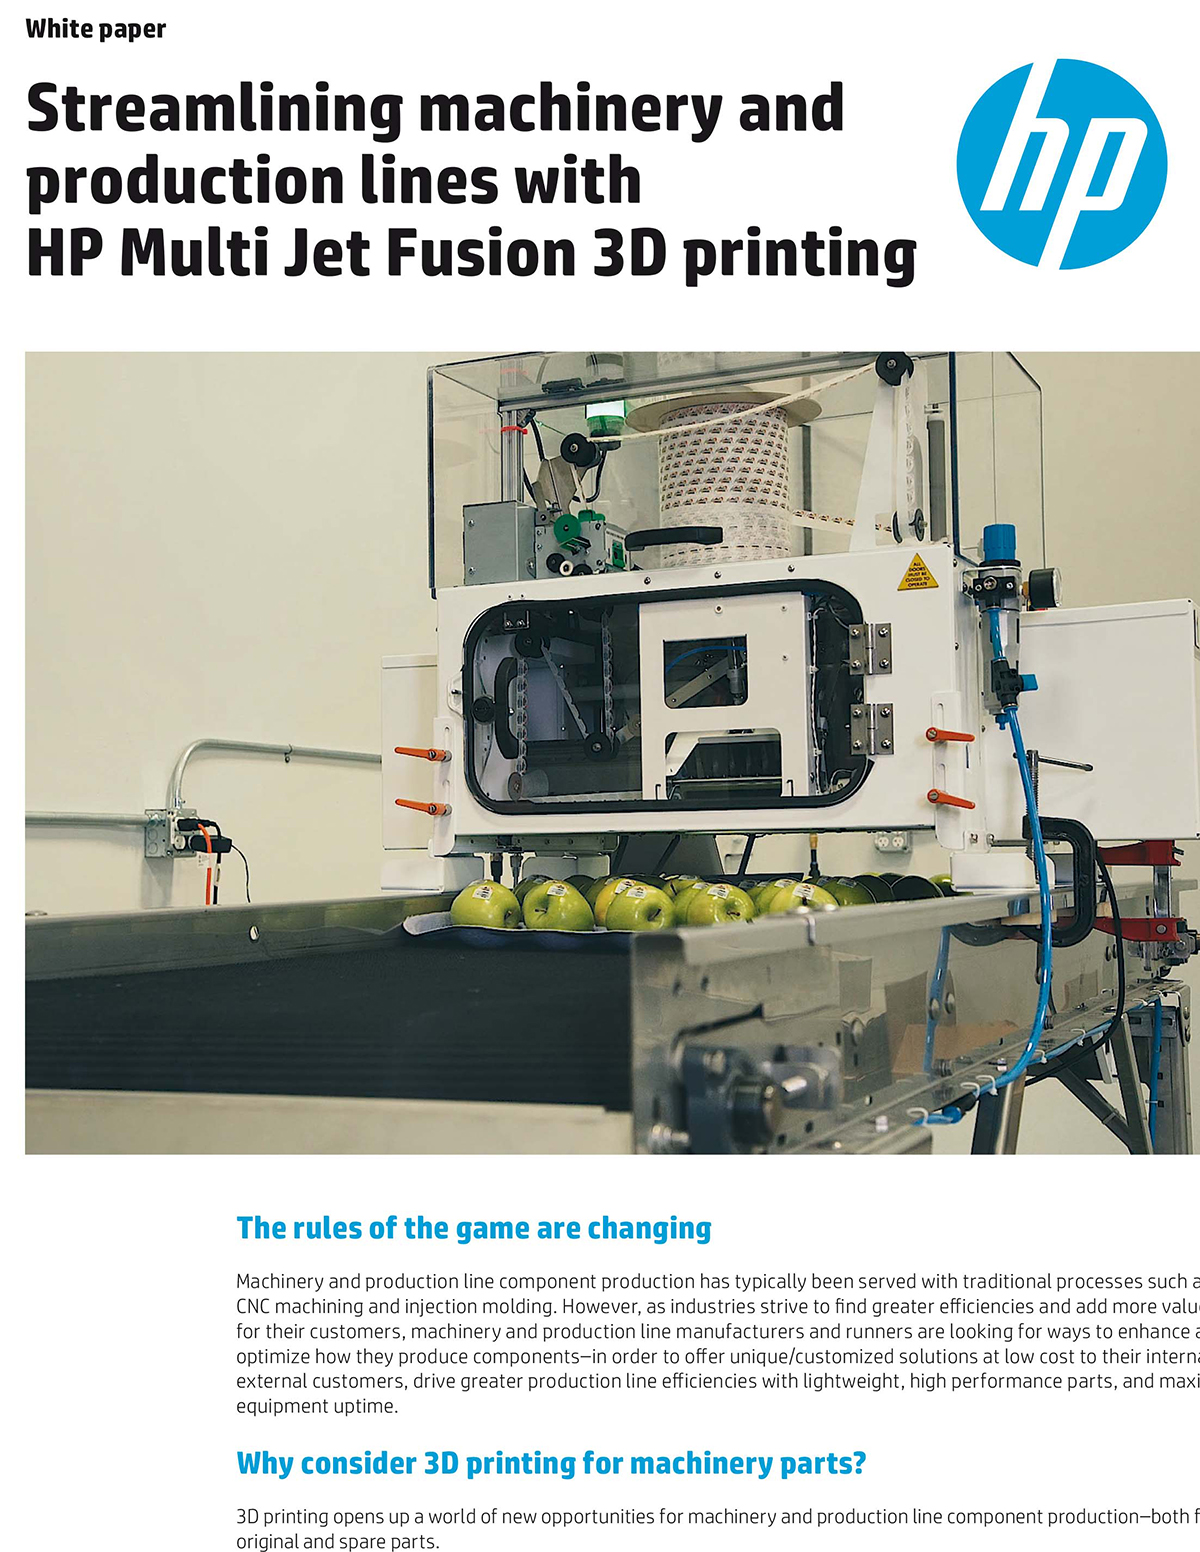 Streamlining machinery and production lines with HP Multi Jet Fusion 3D printing